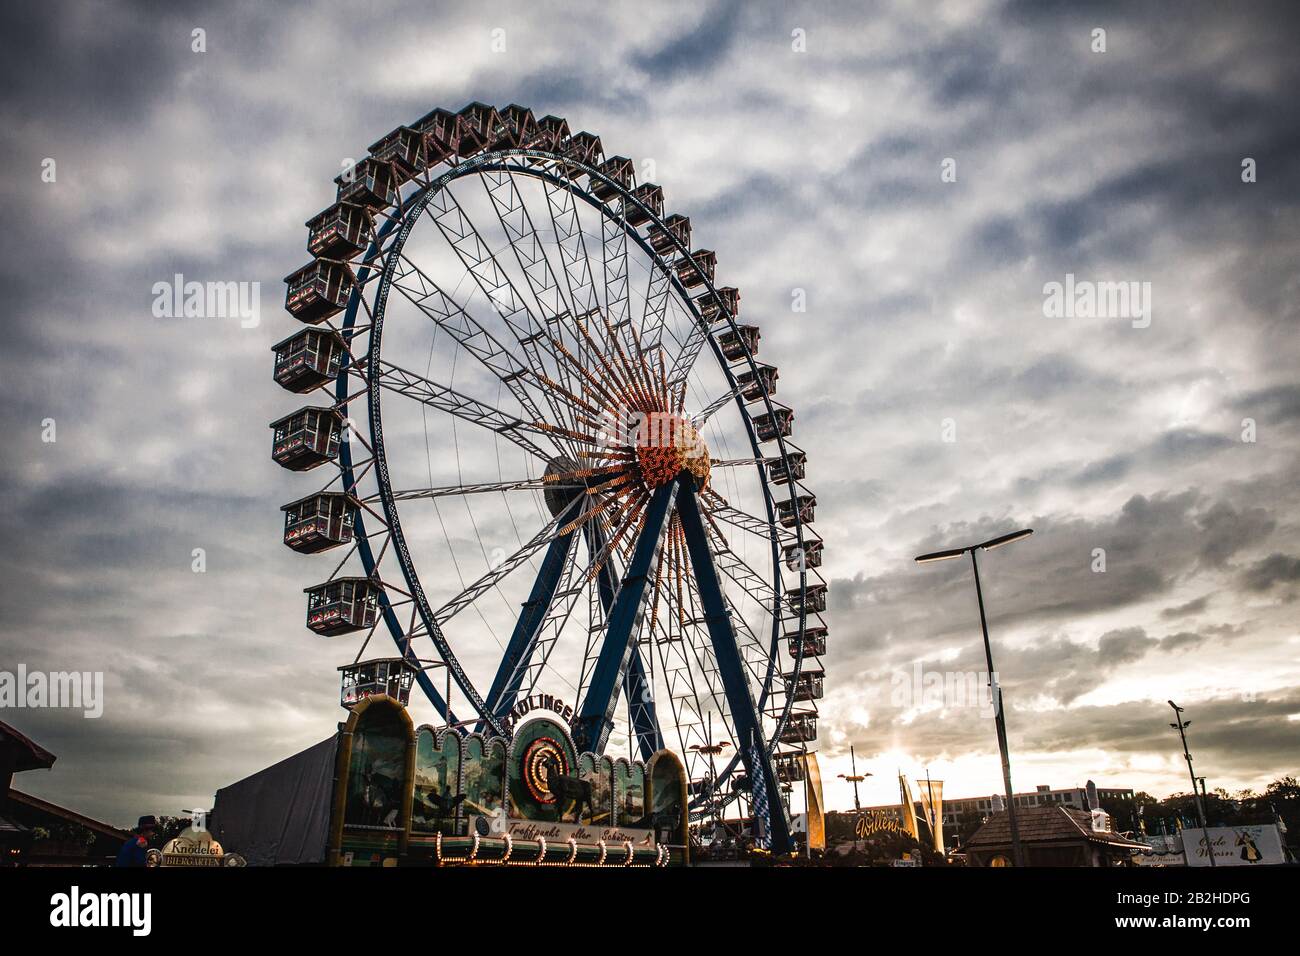 The big wheel stands tall at the Oktoberfest fair-ground in Munich. The clouds darken as the sun sets. Stock Photo